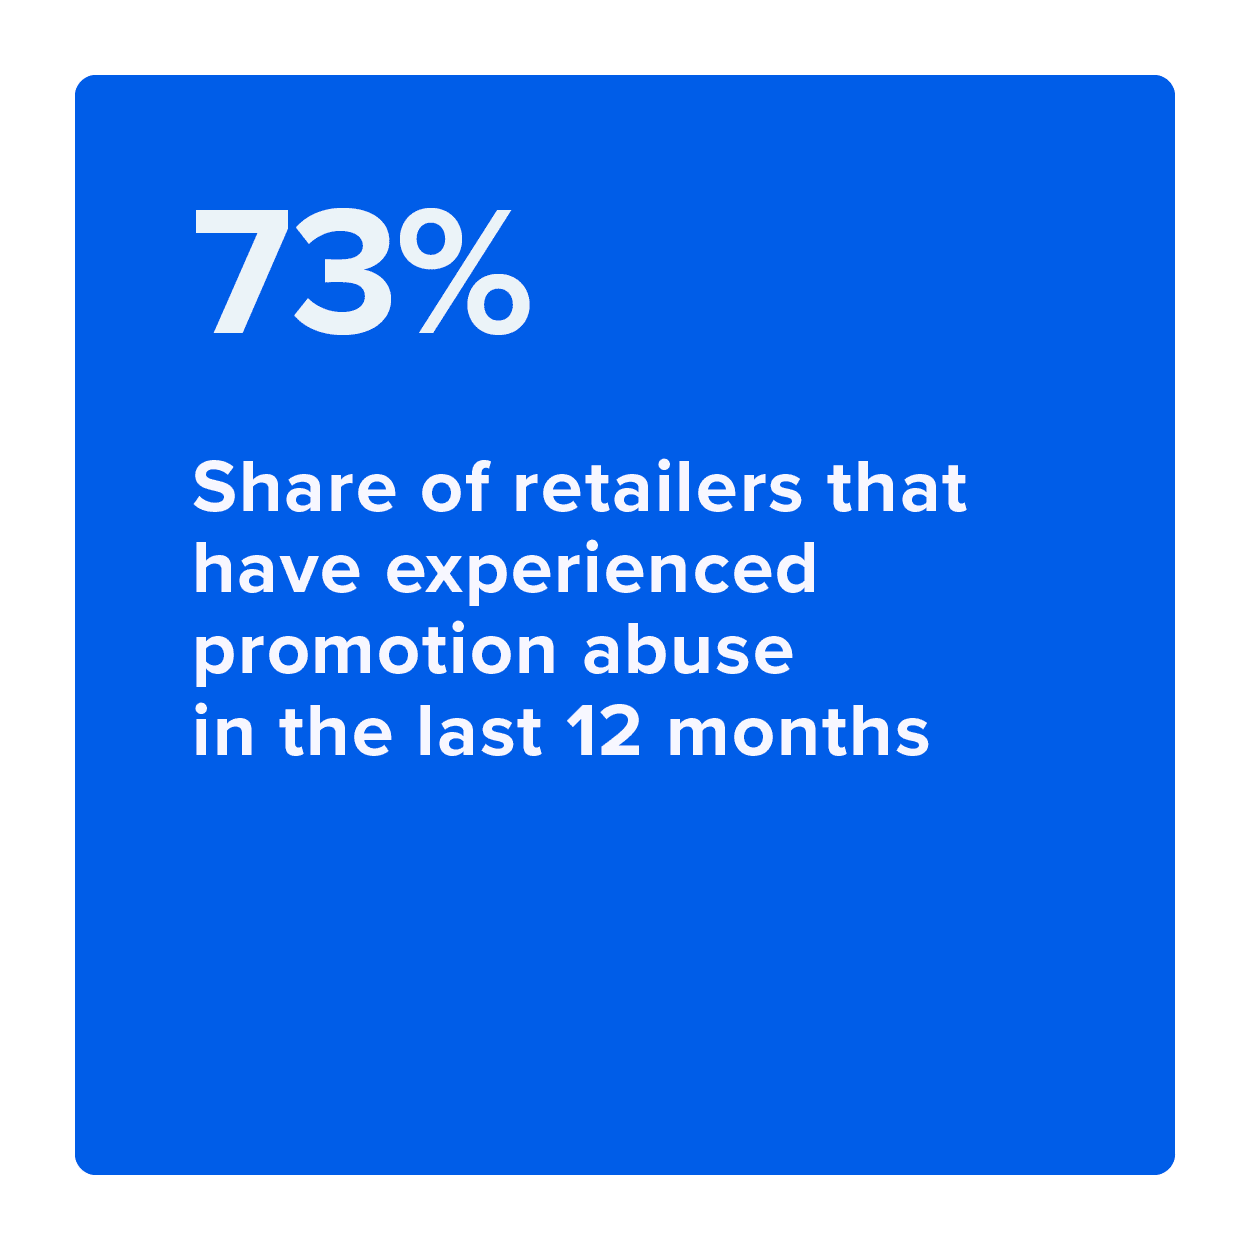 Share of retailers that have experienced promotion abuse